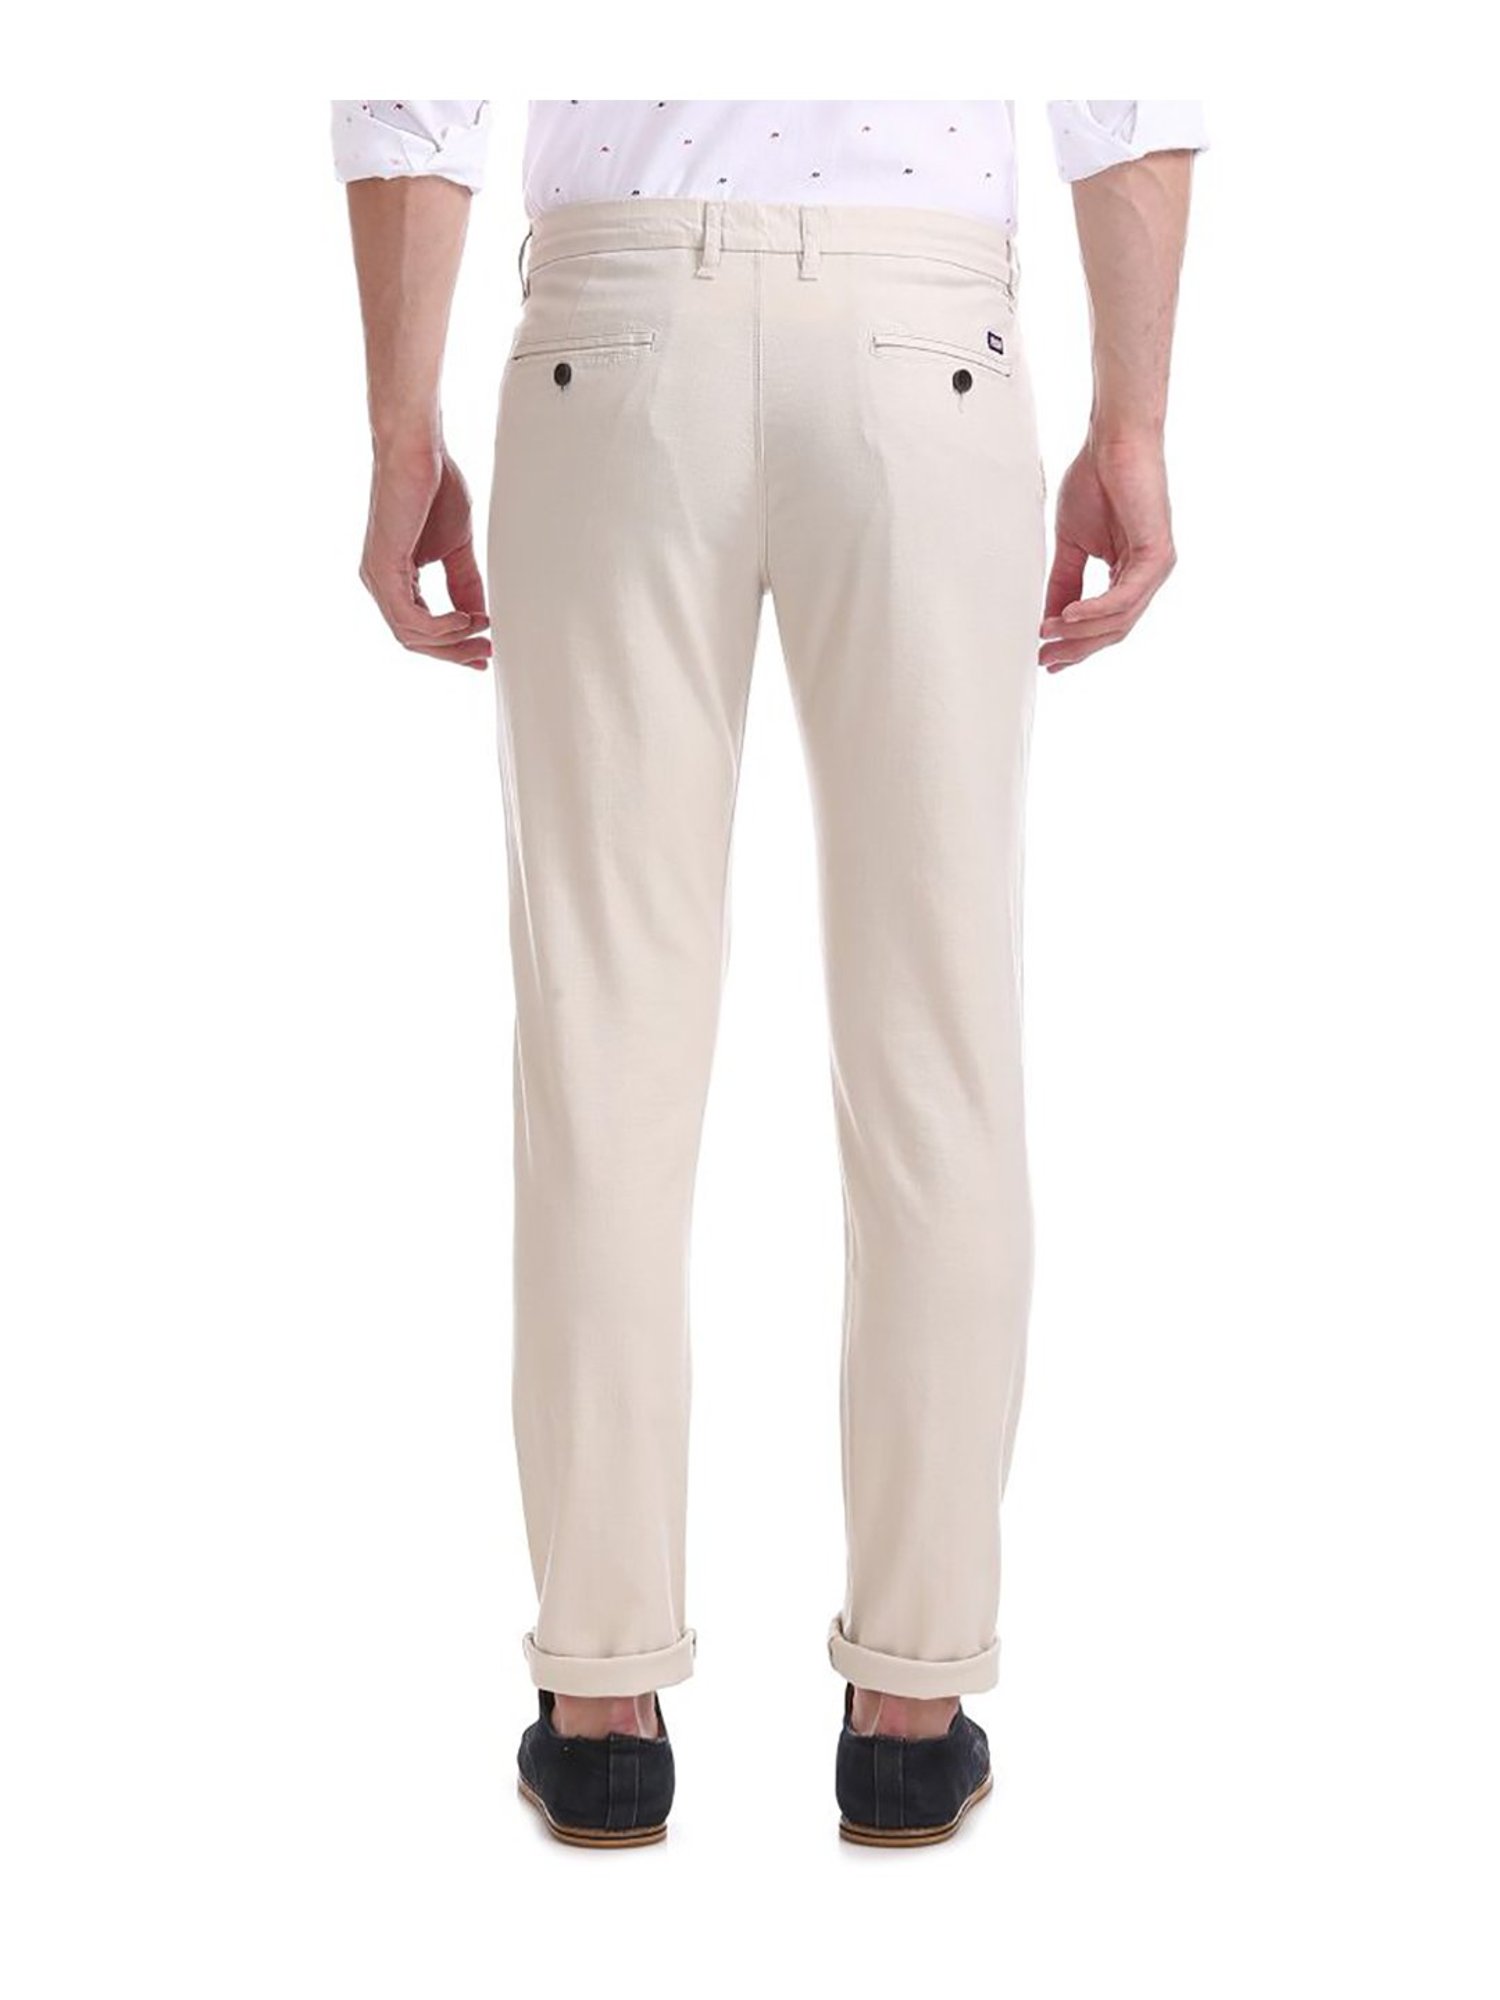 Buy VDOT Textured Cotton Blend Regular Fit Mens Trousers  Shoppers Stop